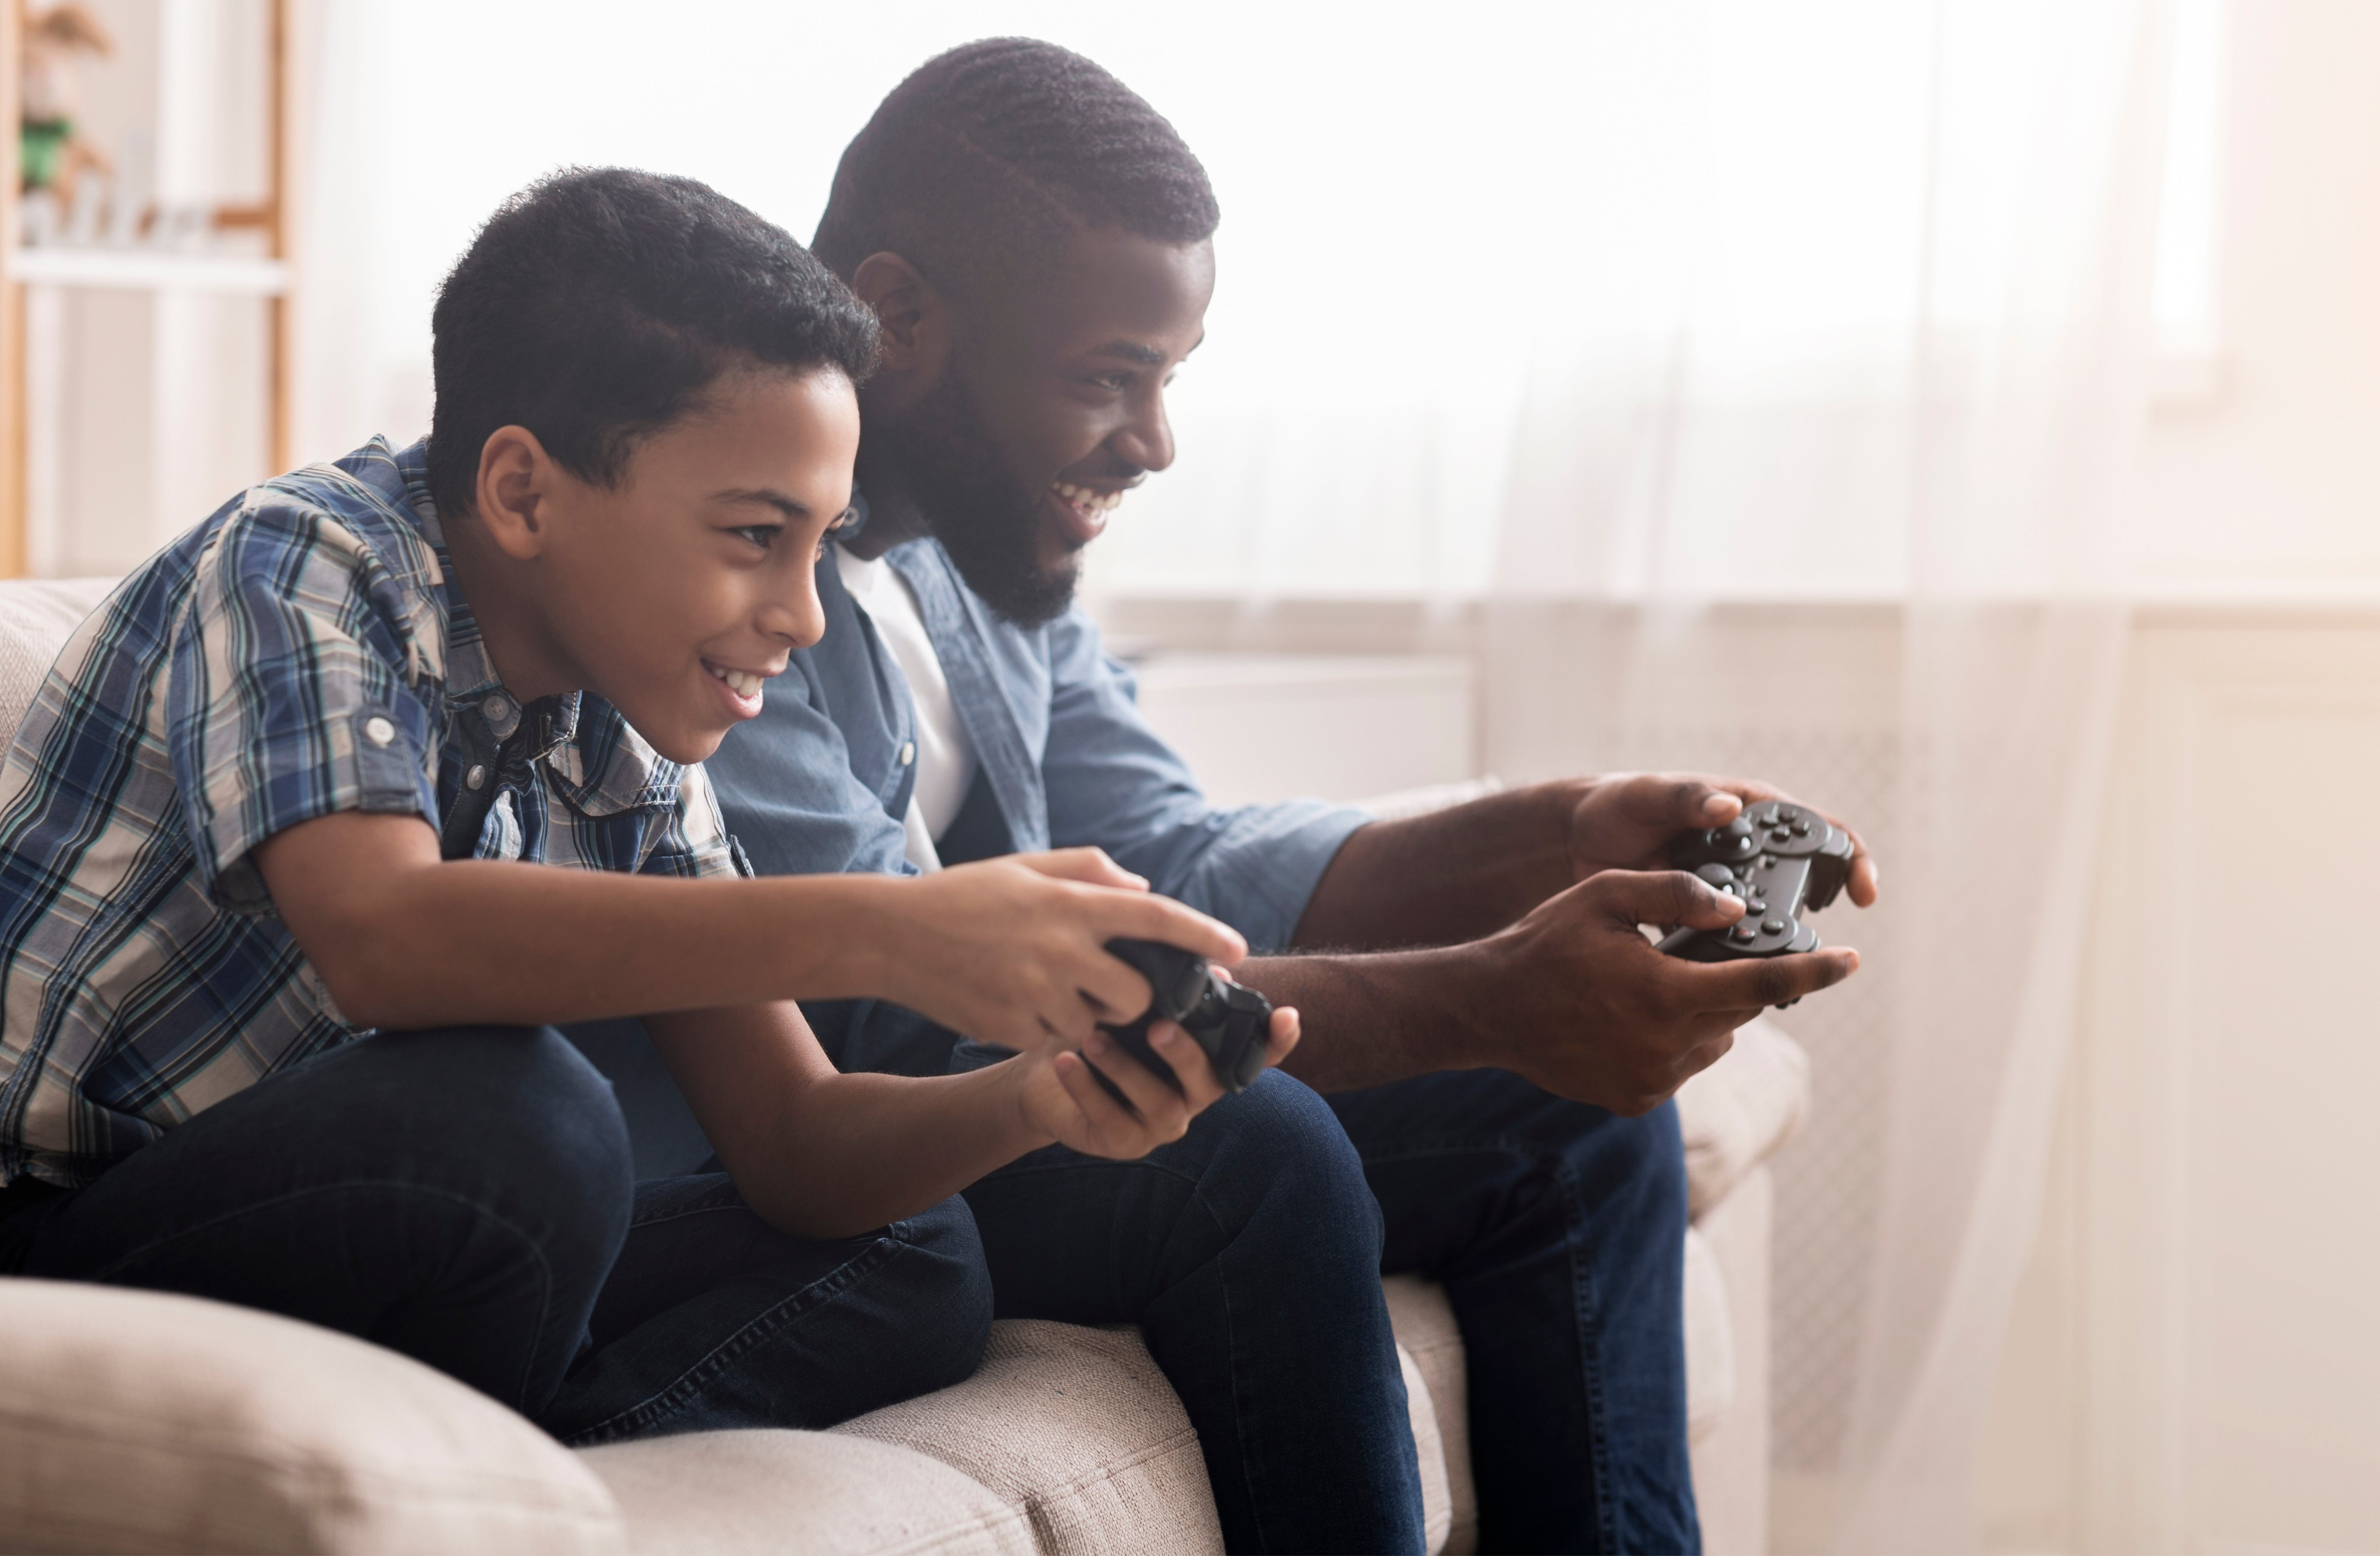 60 per cent of parents admit their children would have struggled over lockdown without video games